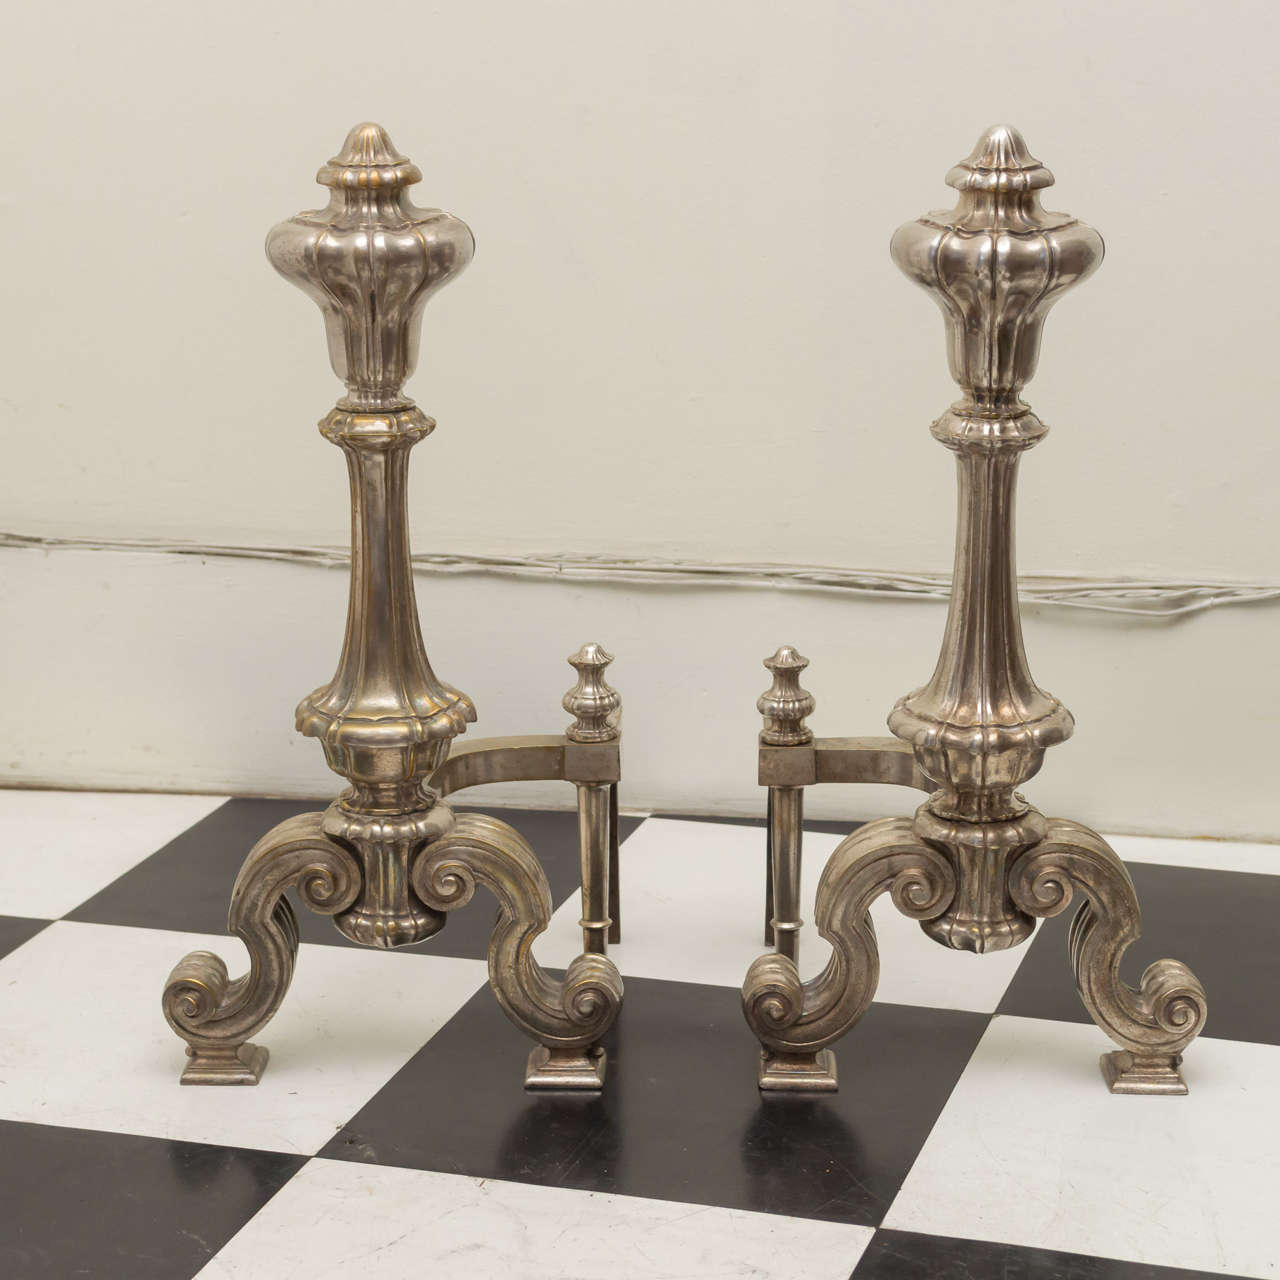 Pair of 19th century French silver gilt bronze andirons in bold form Baroque Revival. Very heavy cast bronze with iron stands.